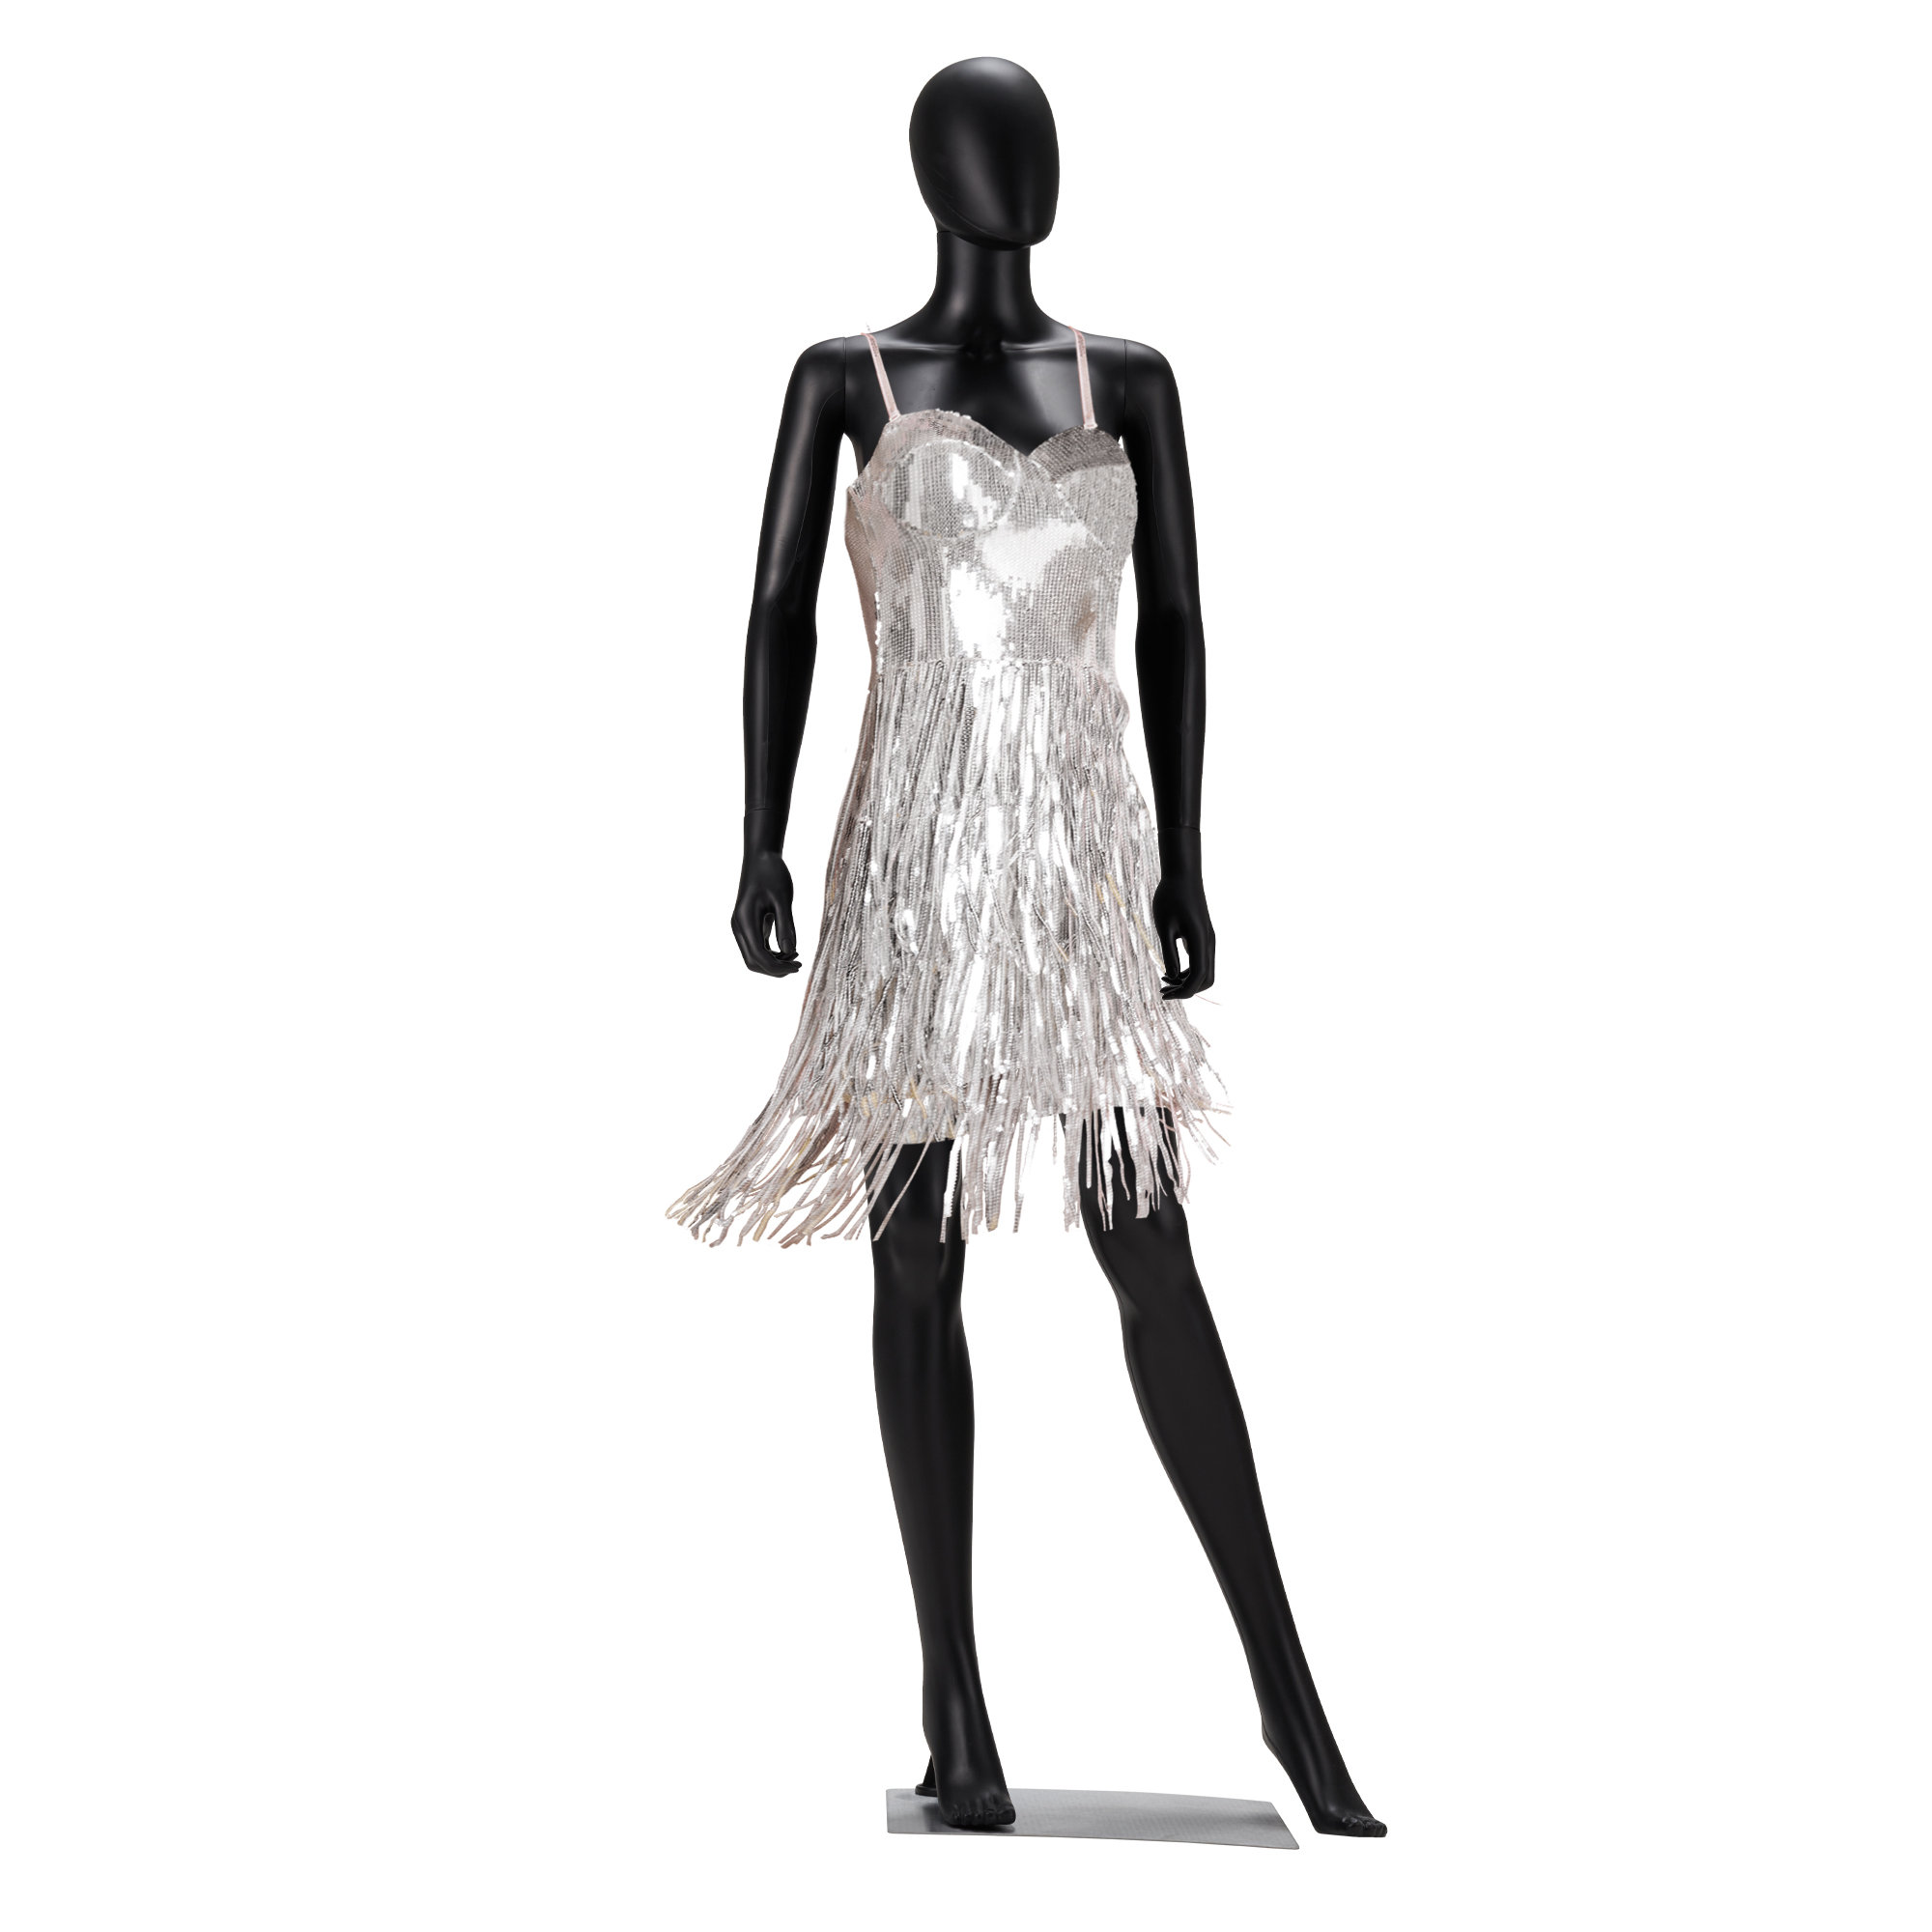 Adjustable Female Mannequin Realistic Full Body Dress Form Display With  Base